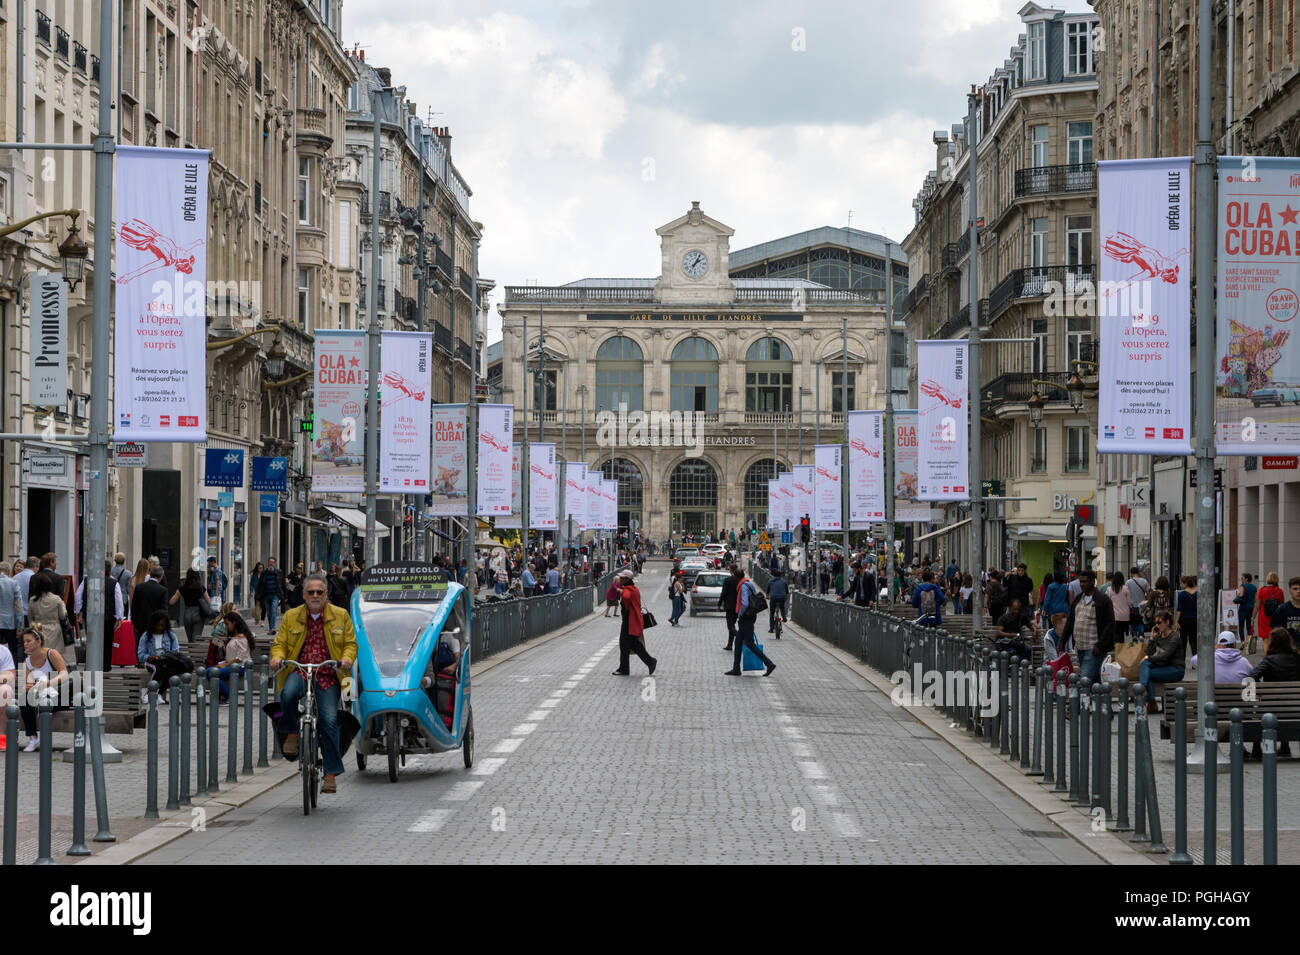 Lille, France - 15 June 2018: Traffic and people walking on Faidherbe street. Lille-Flandres railroad station the background. Stock Photo